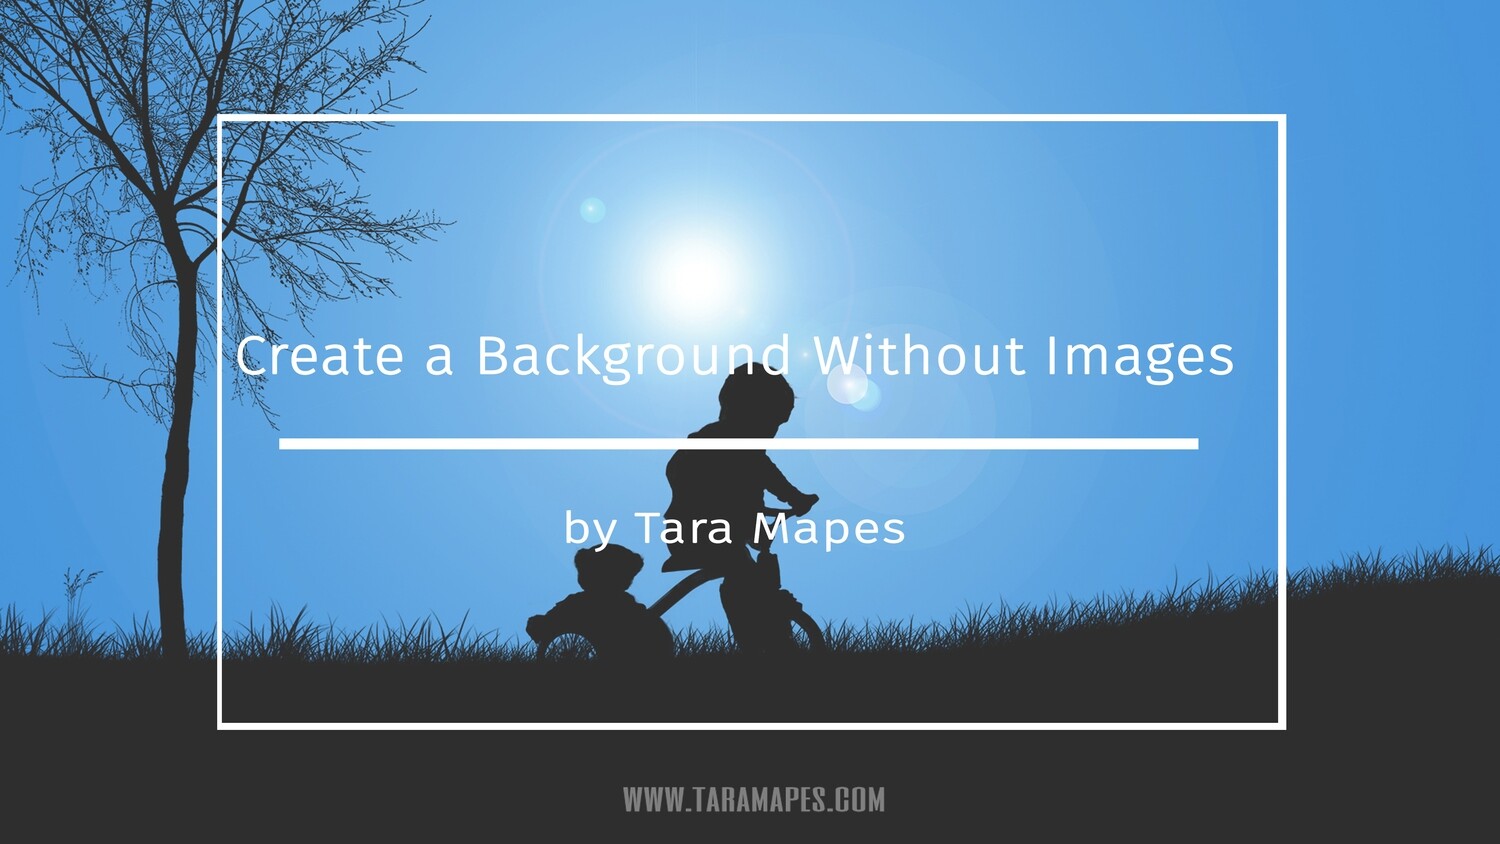 Photoshop Tutorial on How To Create a Background in Photoshop without Images by Tara Mapes